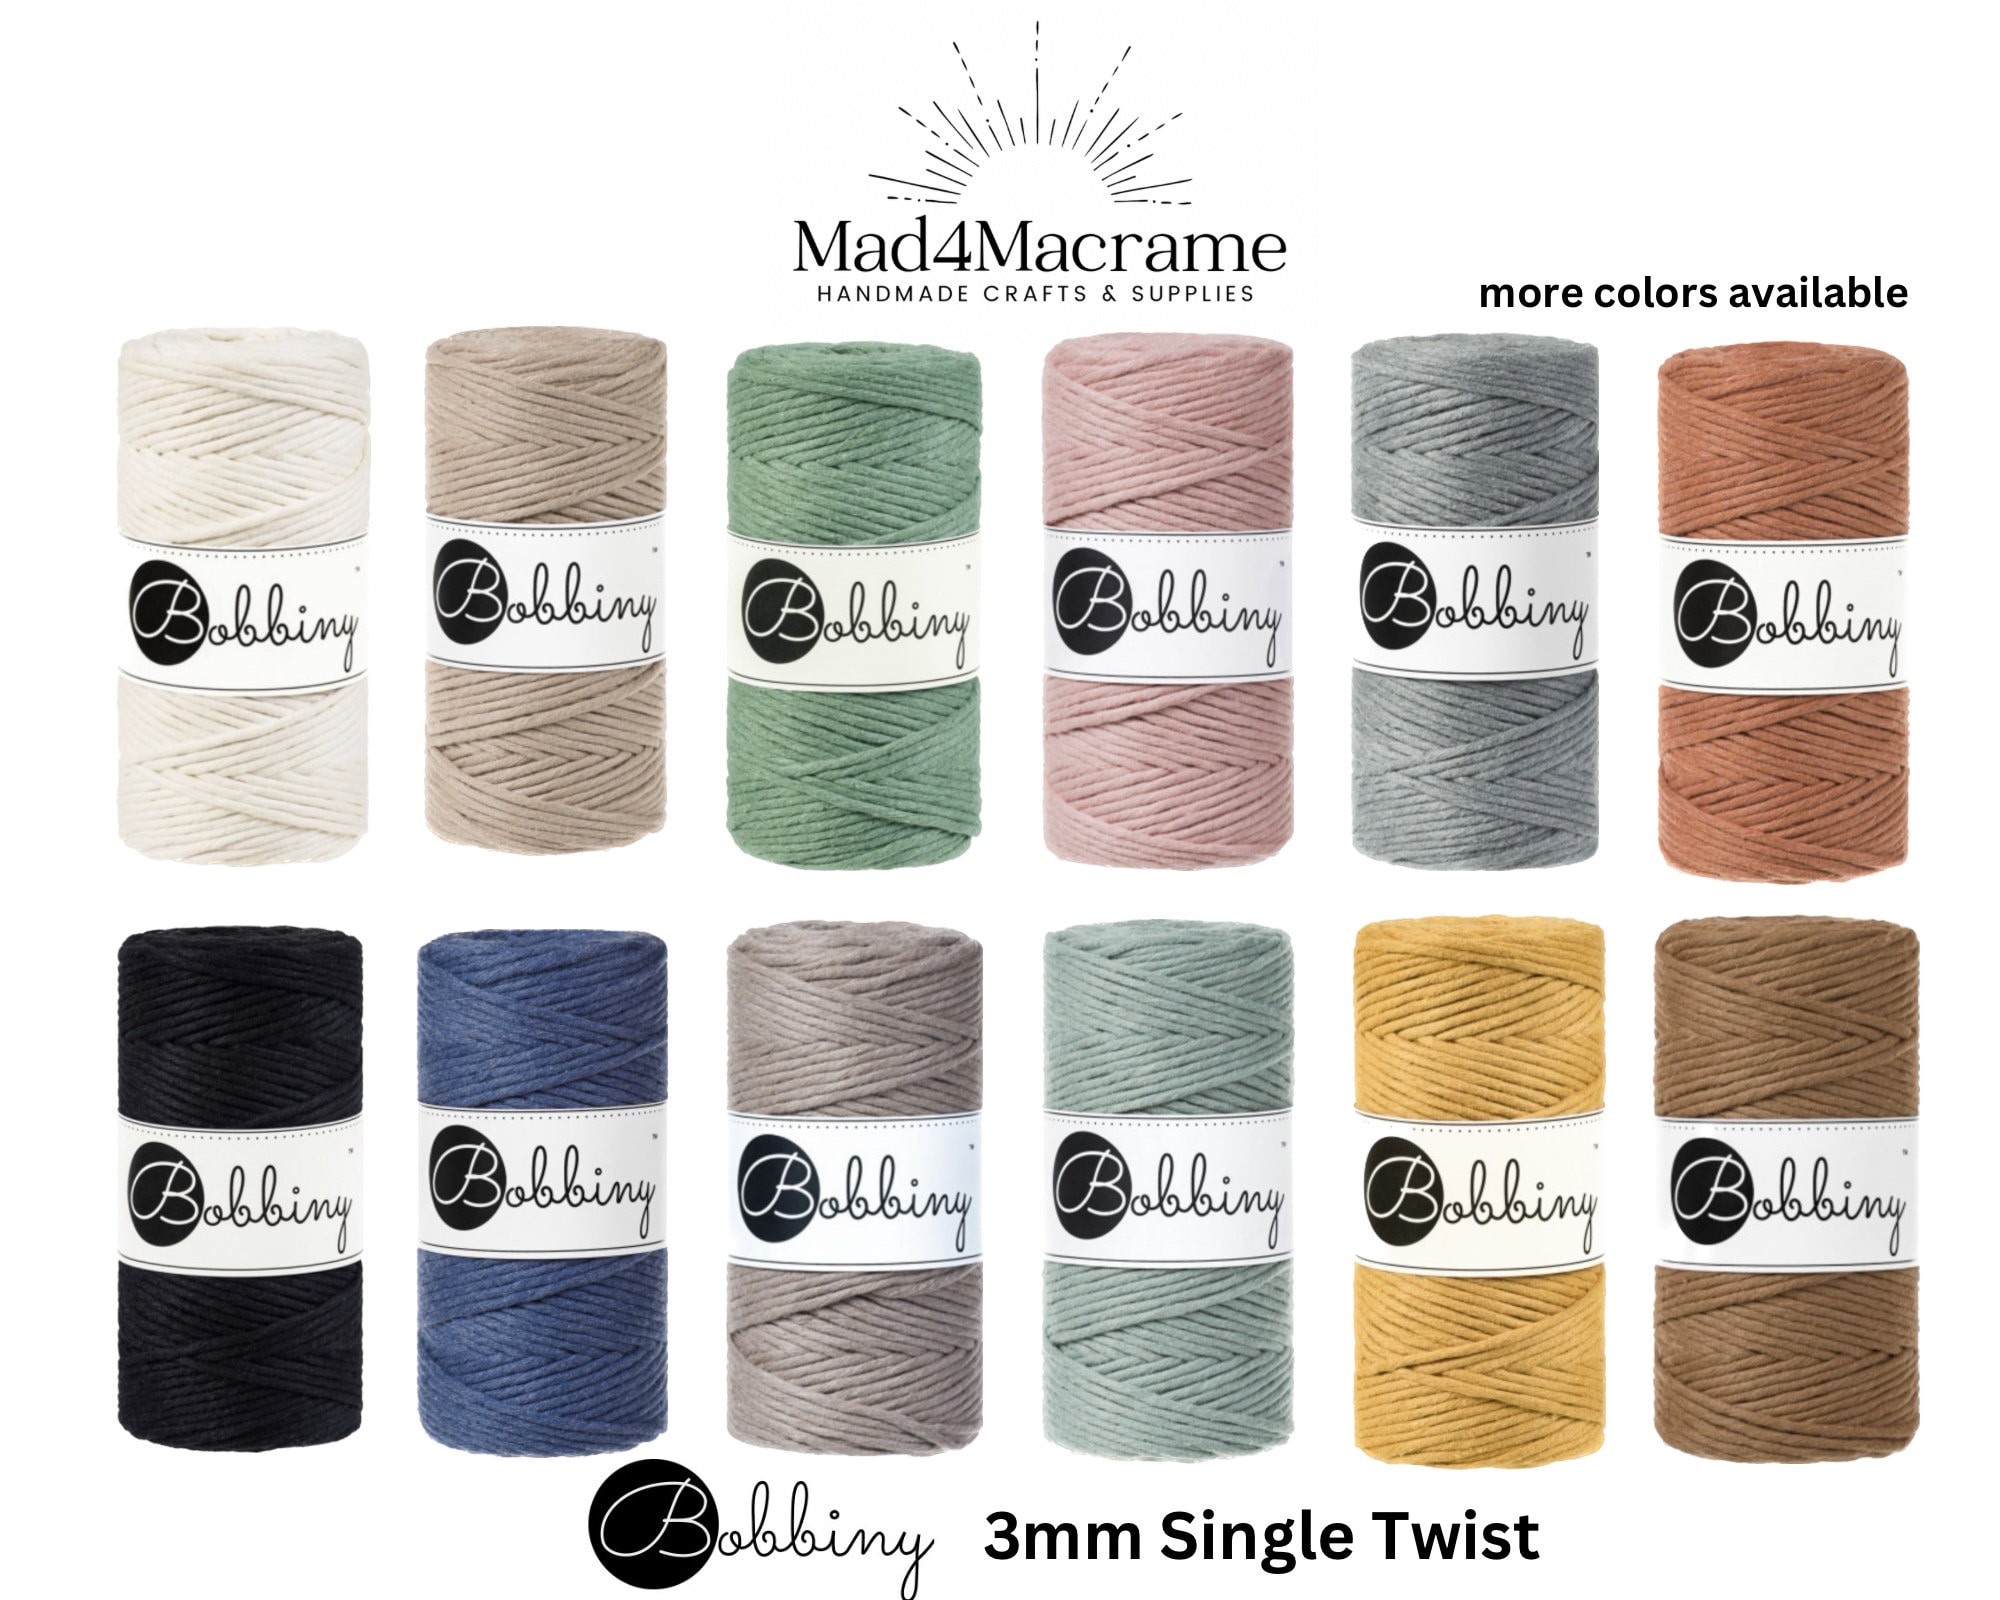 Macrame Cord Cotton Rope 3 mm 1/8 in, 306 yd – 1 Ply Super Soft Cotton Single Twisted String for Macrame Dream Catcher, Boho Wall Hanging Feather